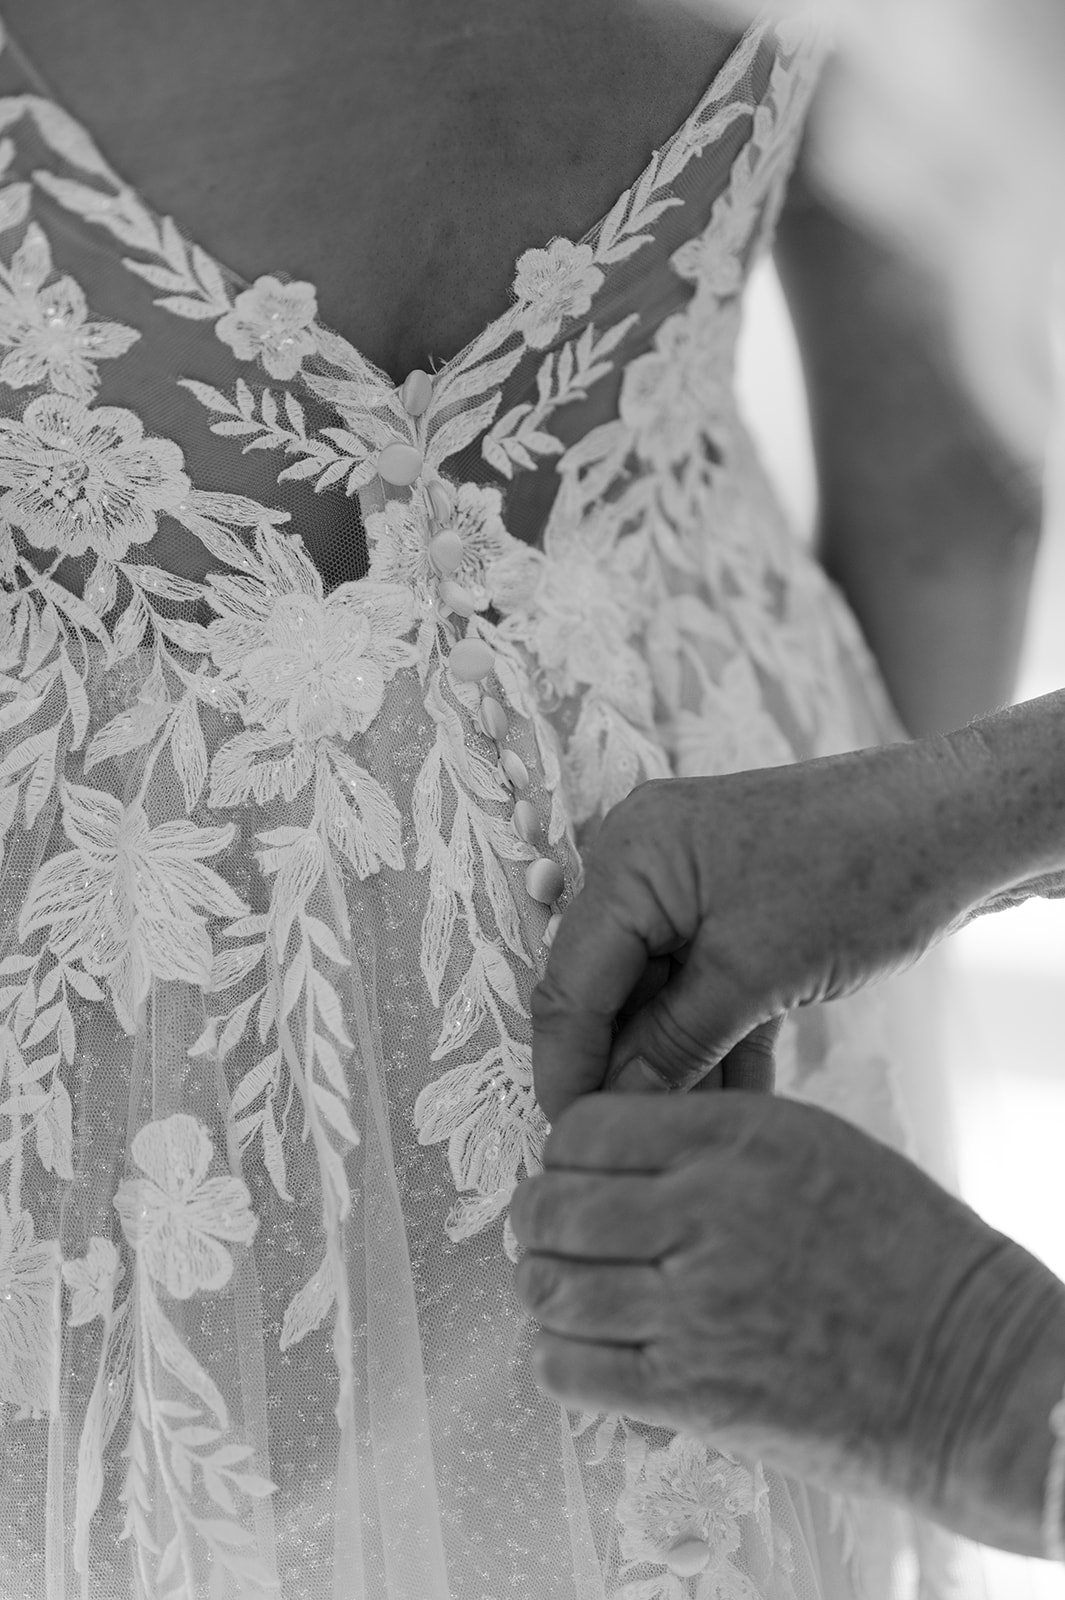 Bride getting her wedding dress buttoned by her grandma. 